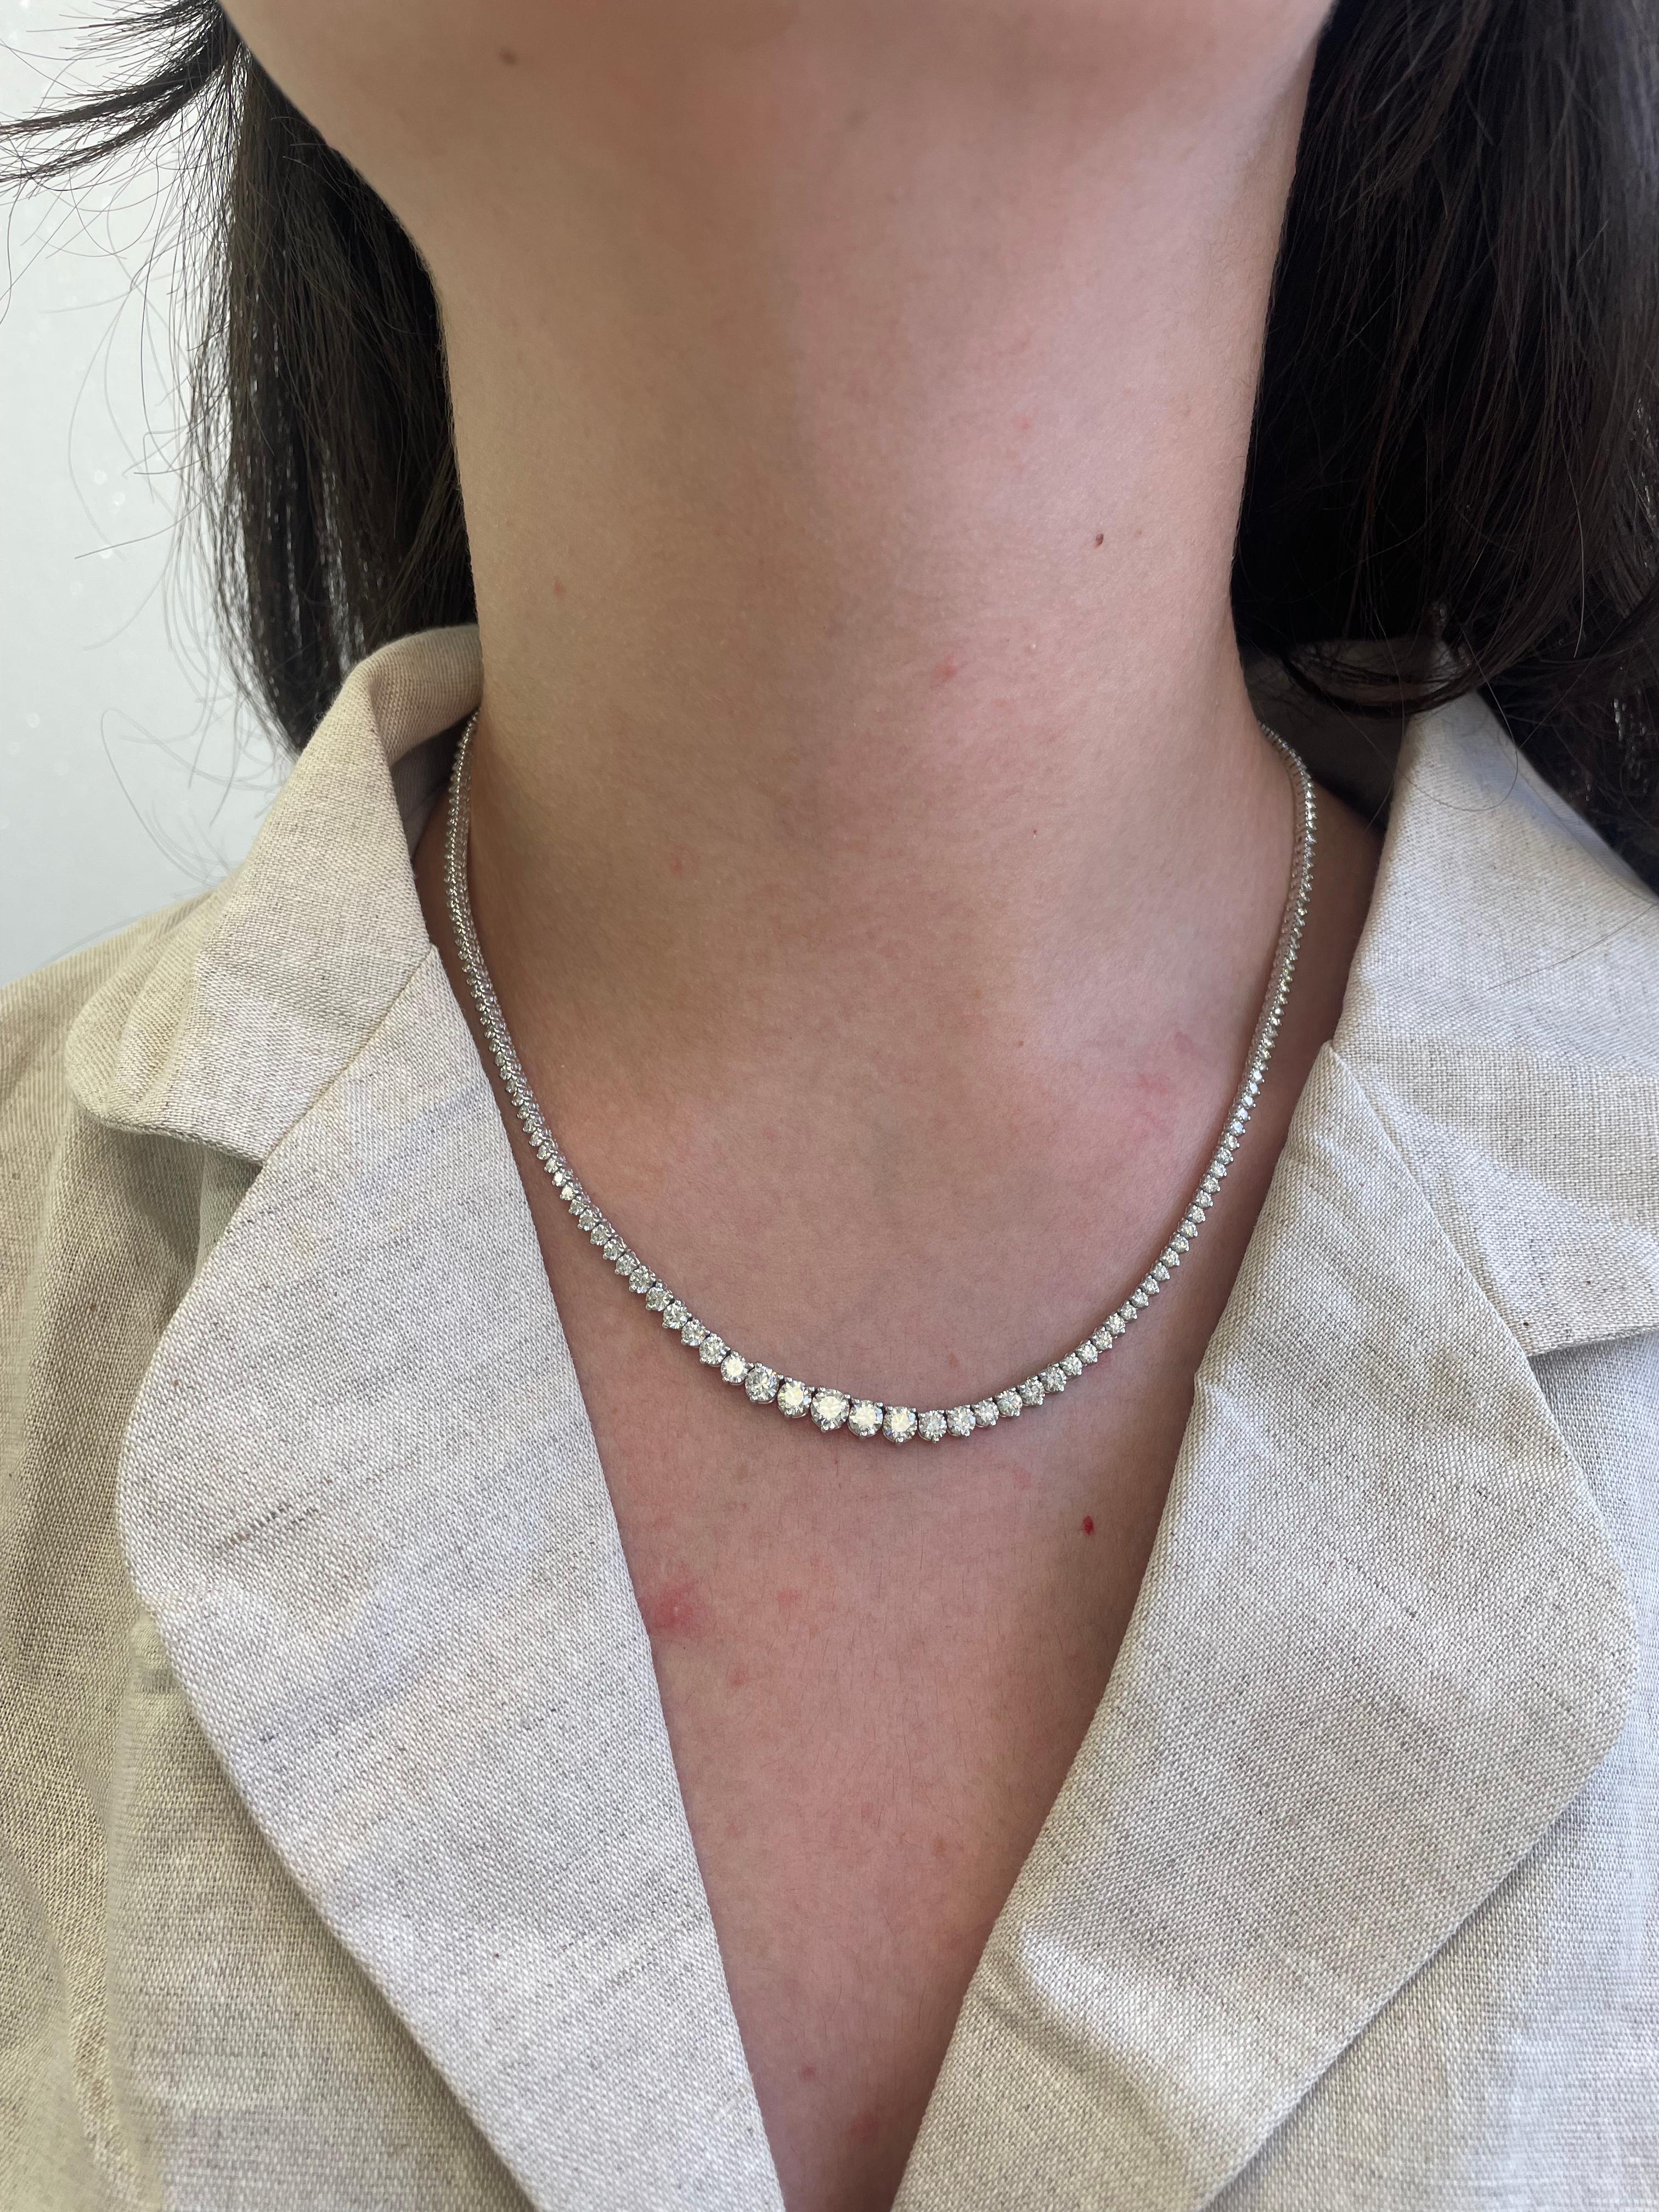 Beautiful and classic diamond tennis riviera necklace, by Alexander Beverly Hills.
8.53 carats of round brilliant diamonds, approximately F-H color and VVS2-SI1 clarity. 18k white gold, 14.45 grams, three prong set, 16n.
Accommodated with an